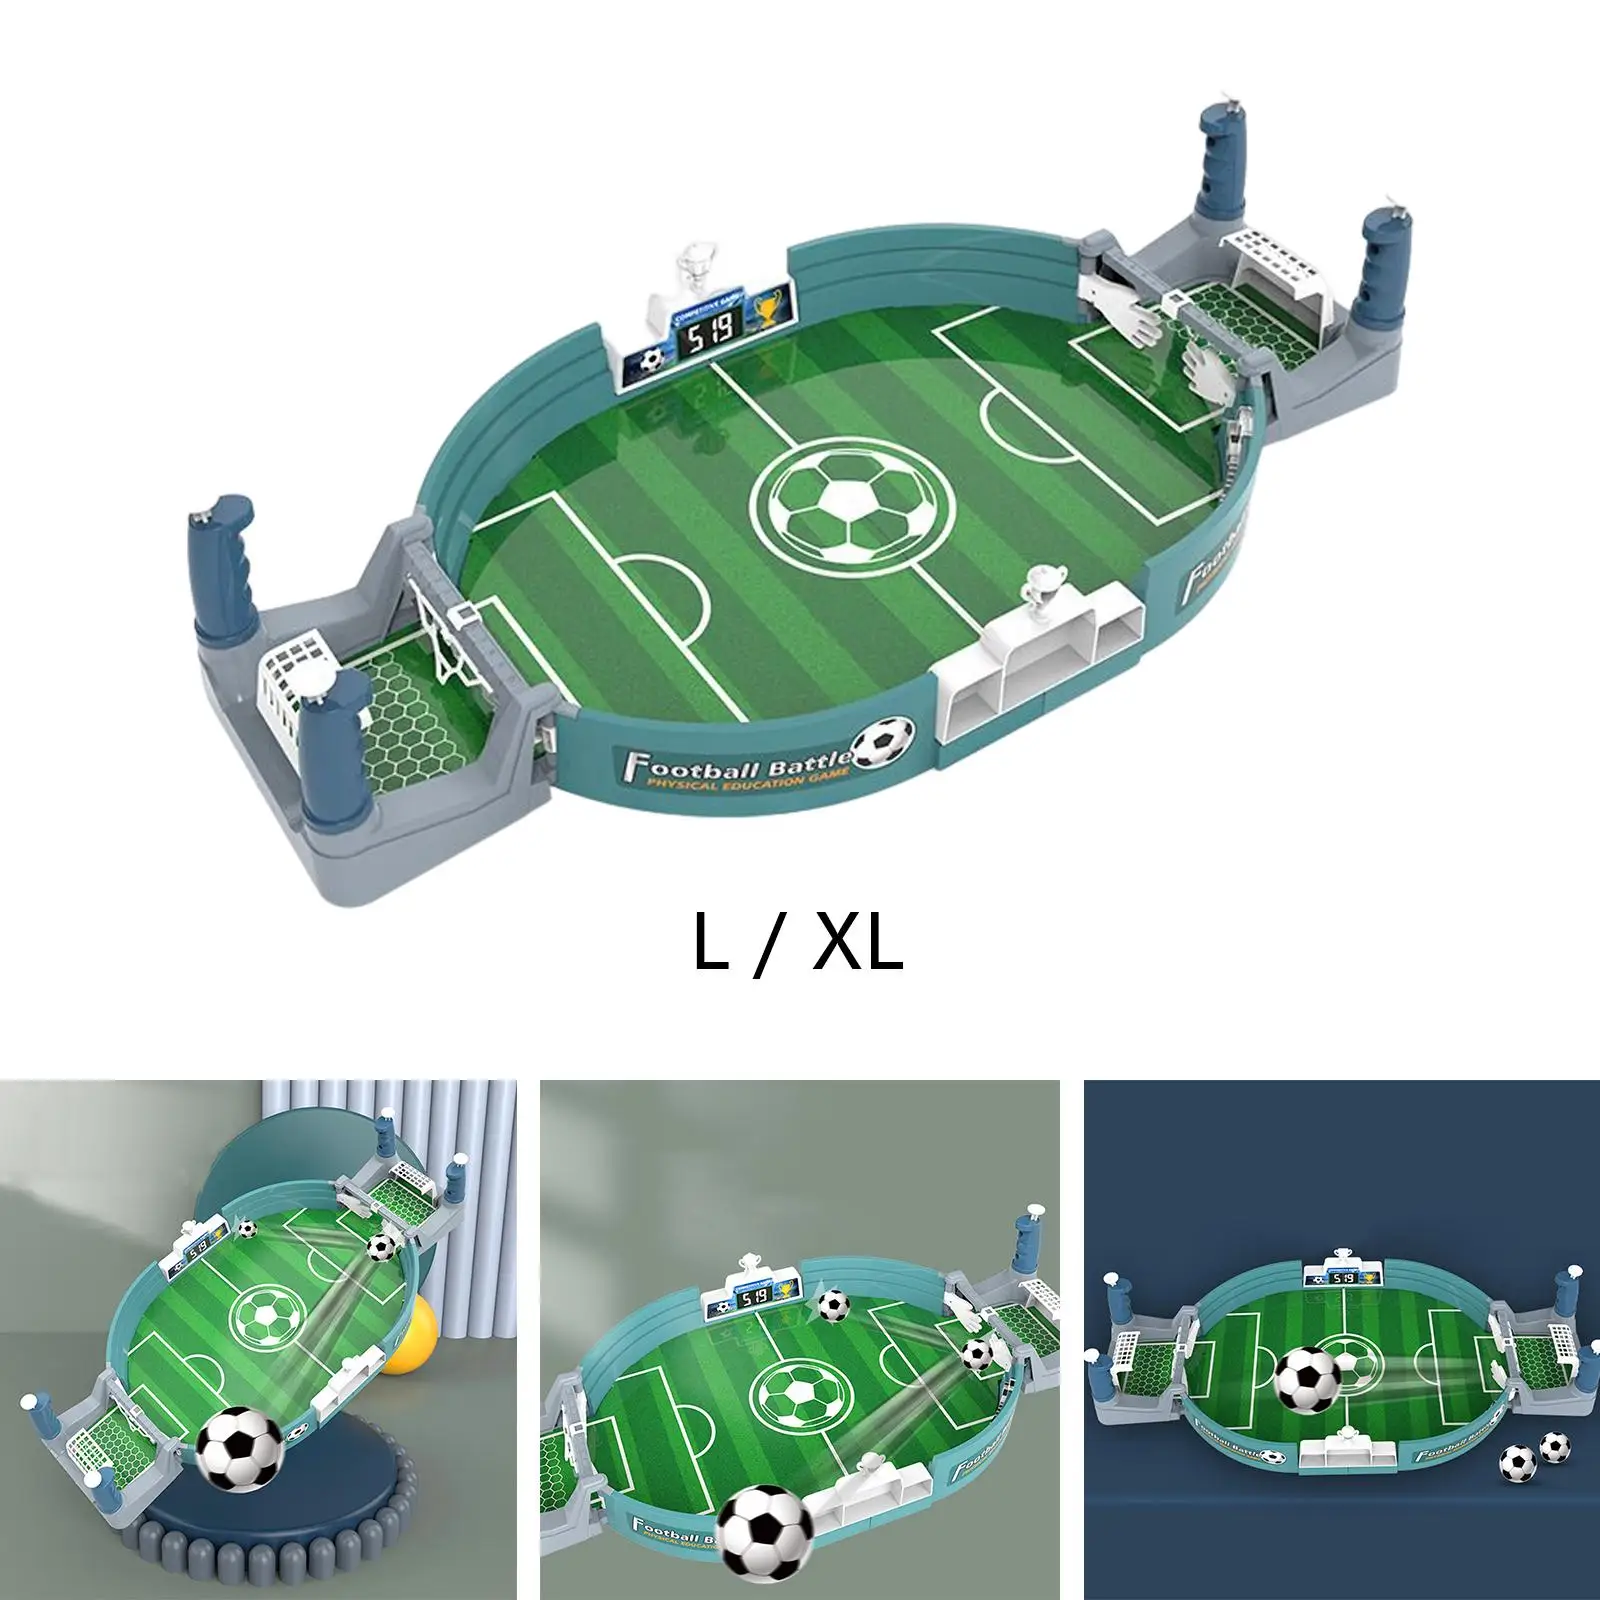 Interactive Tabletop Football Games Indoor Sport Toy Desktop Football Board Games Kit for Adults Family Kids Girls Boys